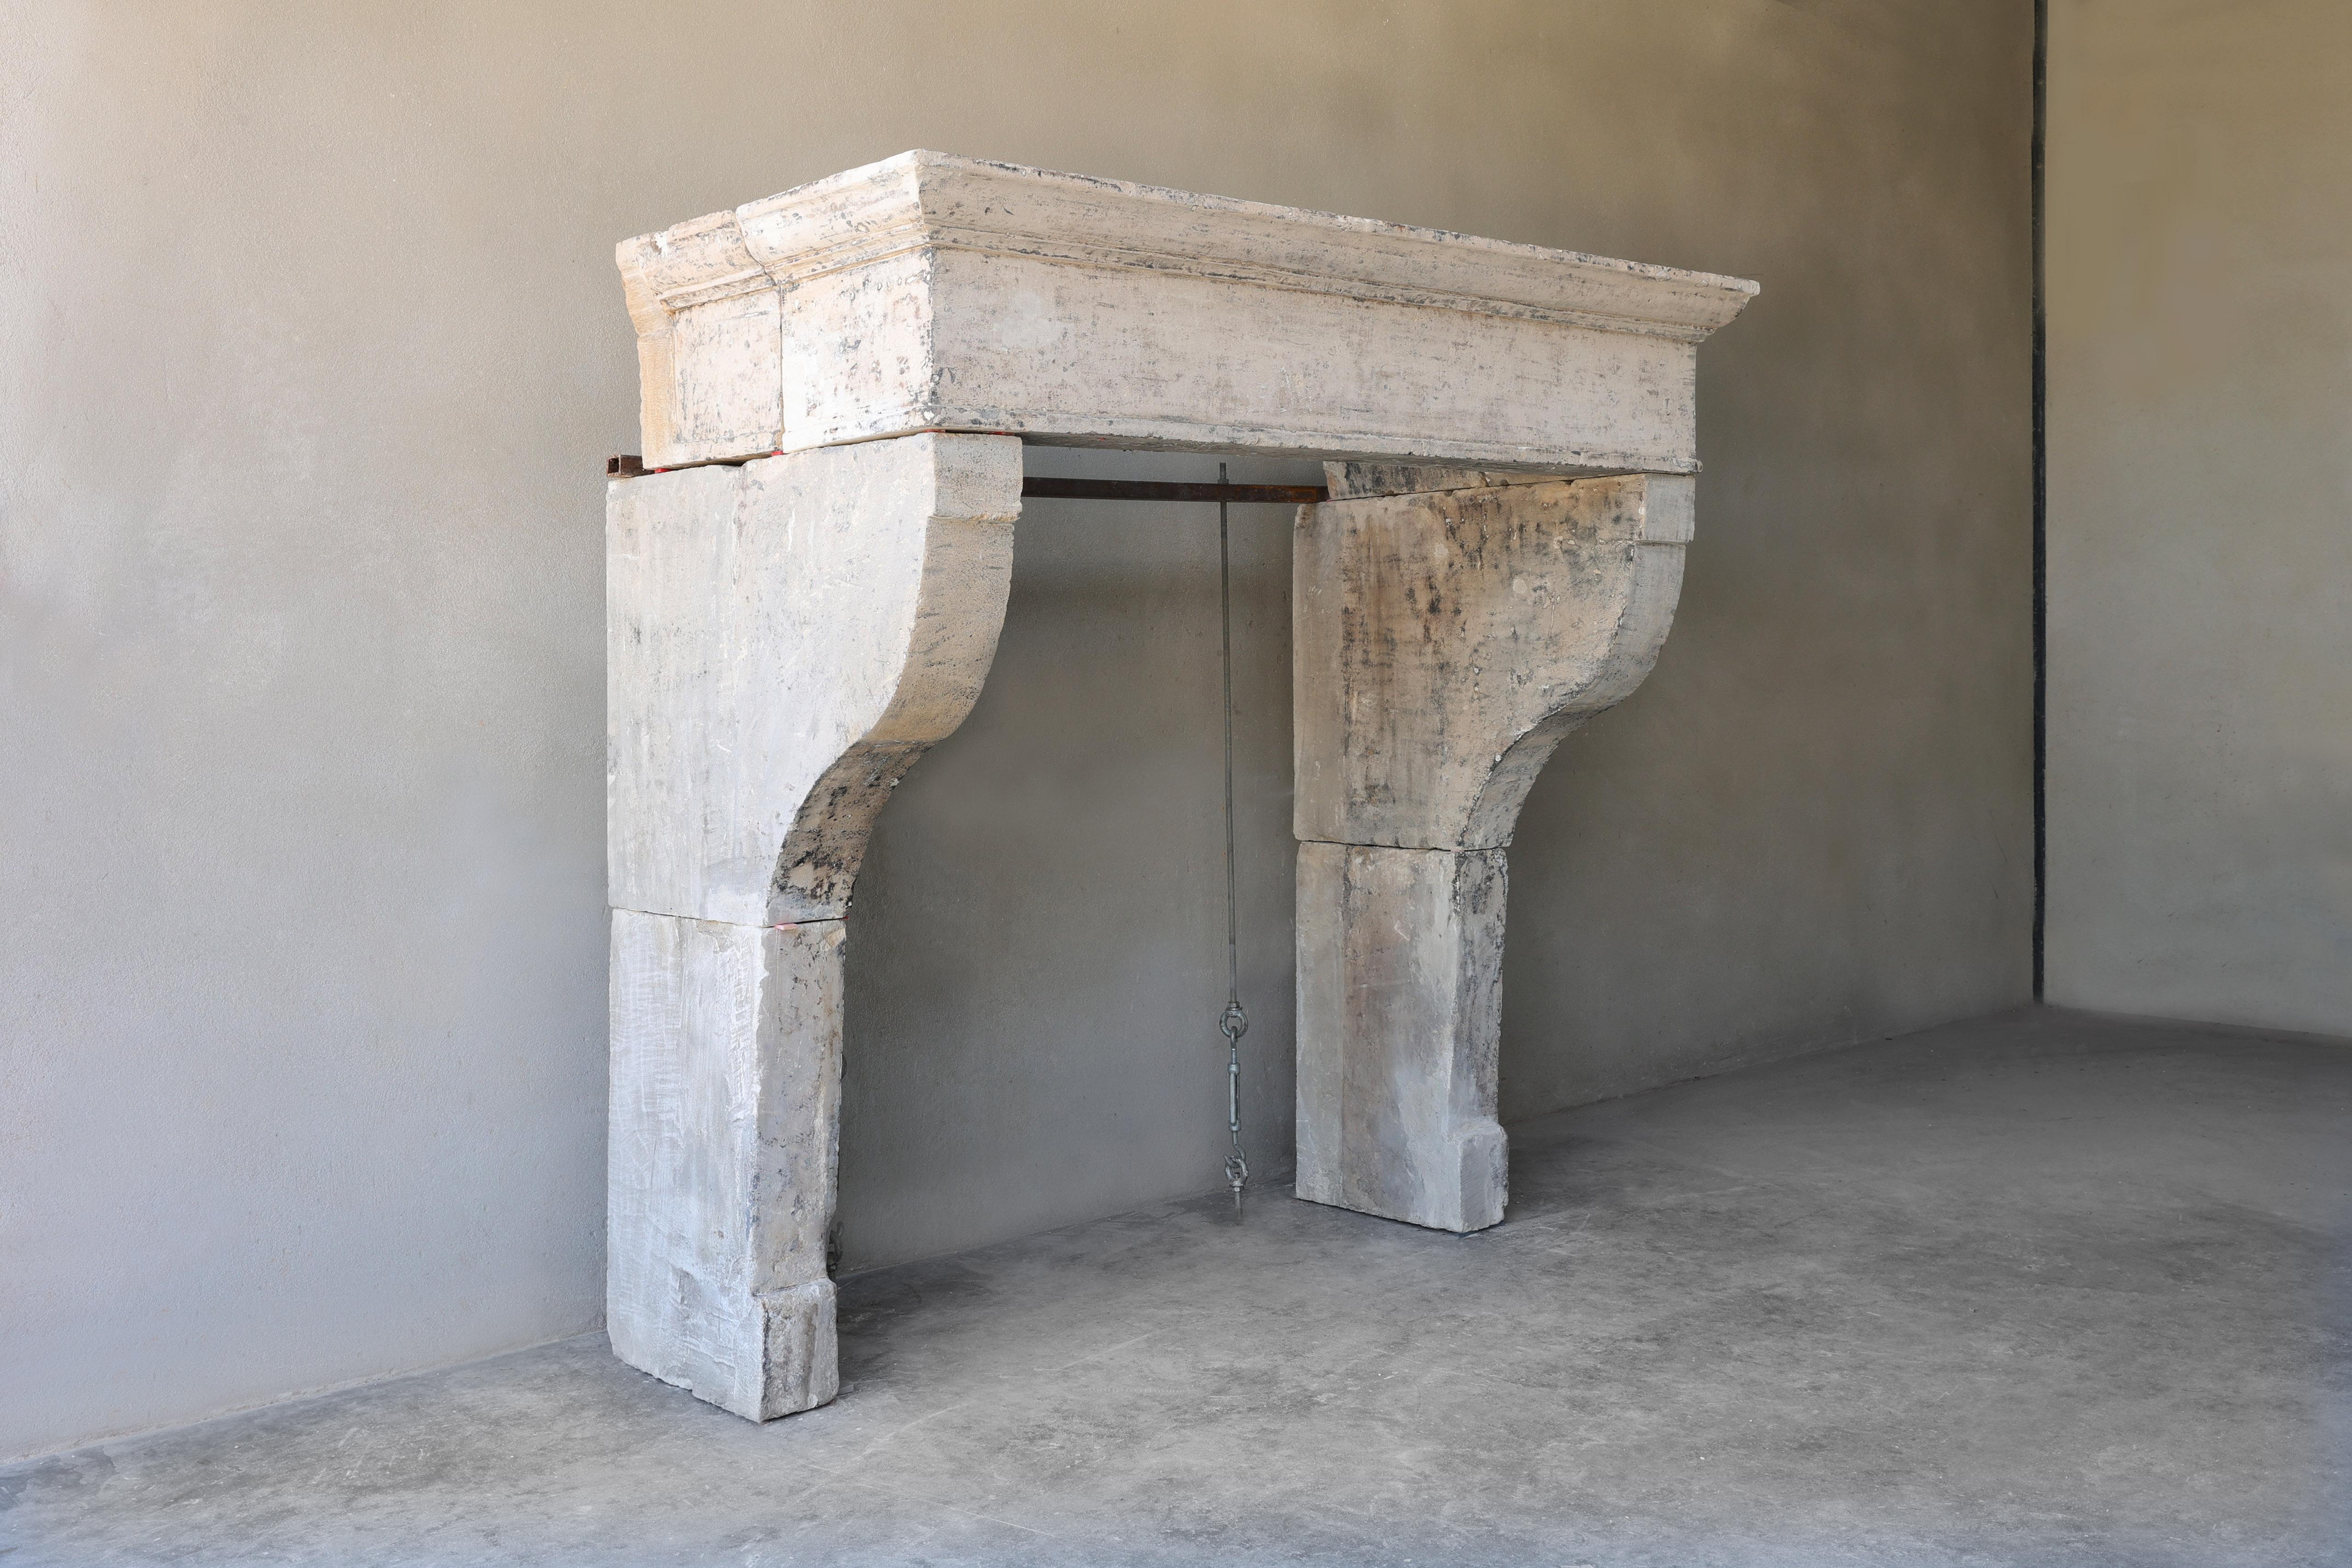 Rustic antique fireplace of French limestone in Campagnarde style. This mantelpiece has a nice wide front part and slightly curved legs. A fireplace with a nostalgic look and dimensions that can be used for many interiors!